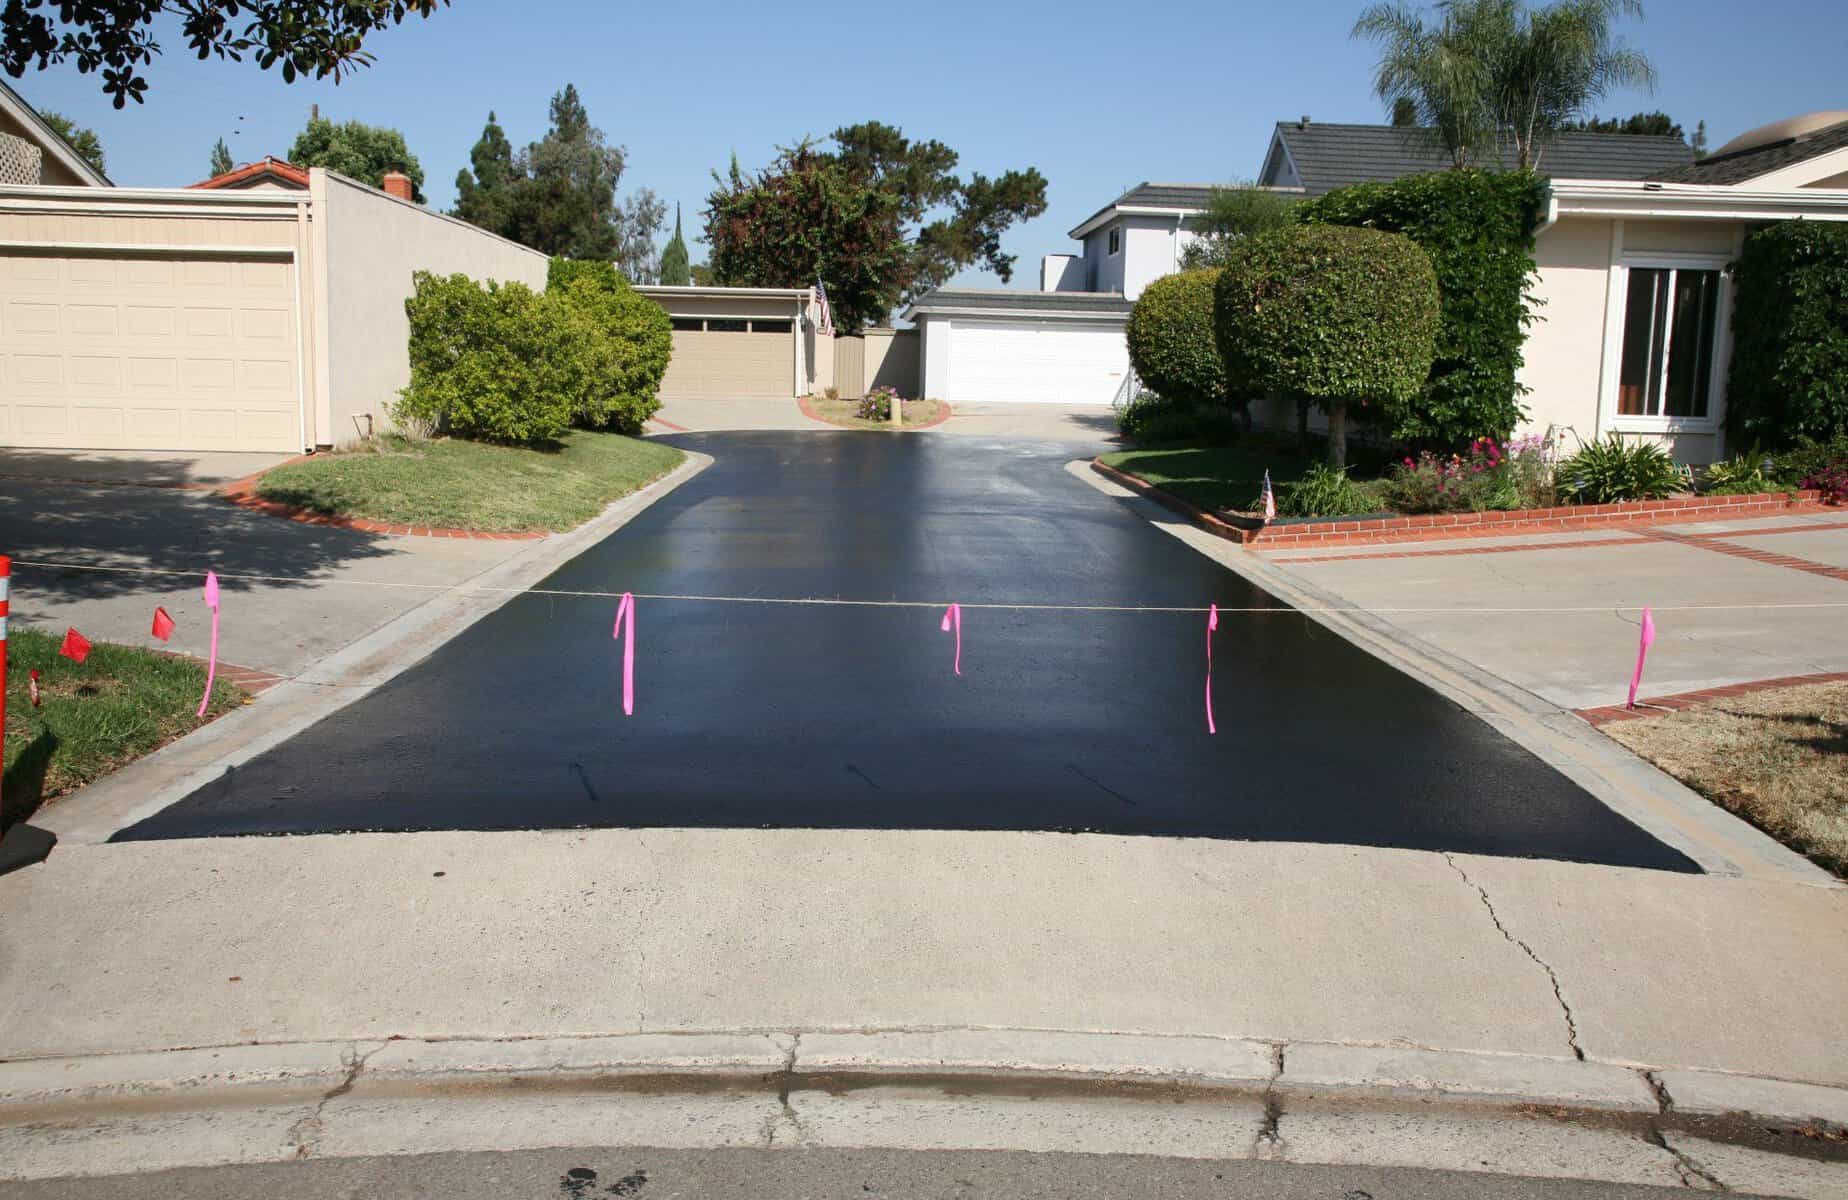 This blacktop sealant produces  an aesthetically pleasing look, making the driveway appear brand new.